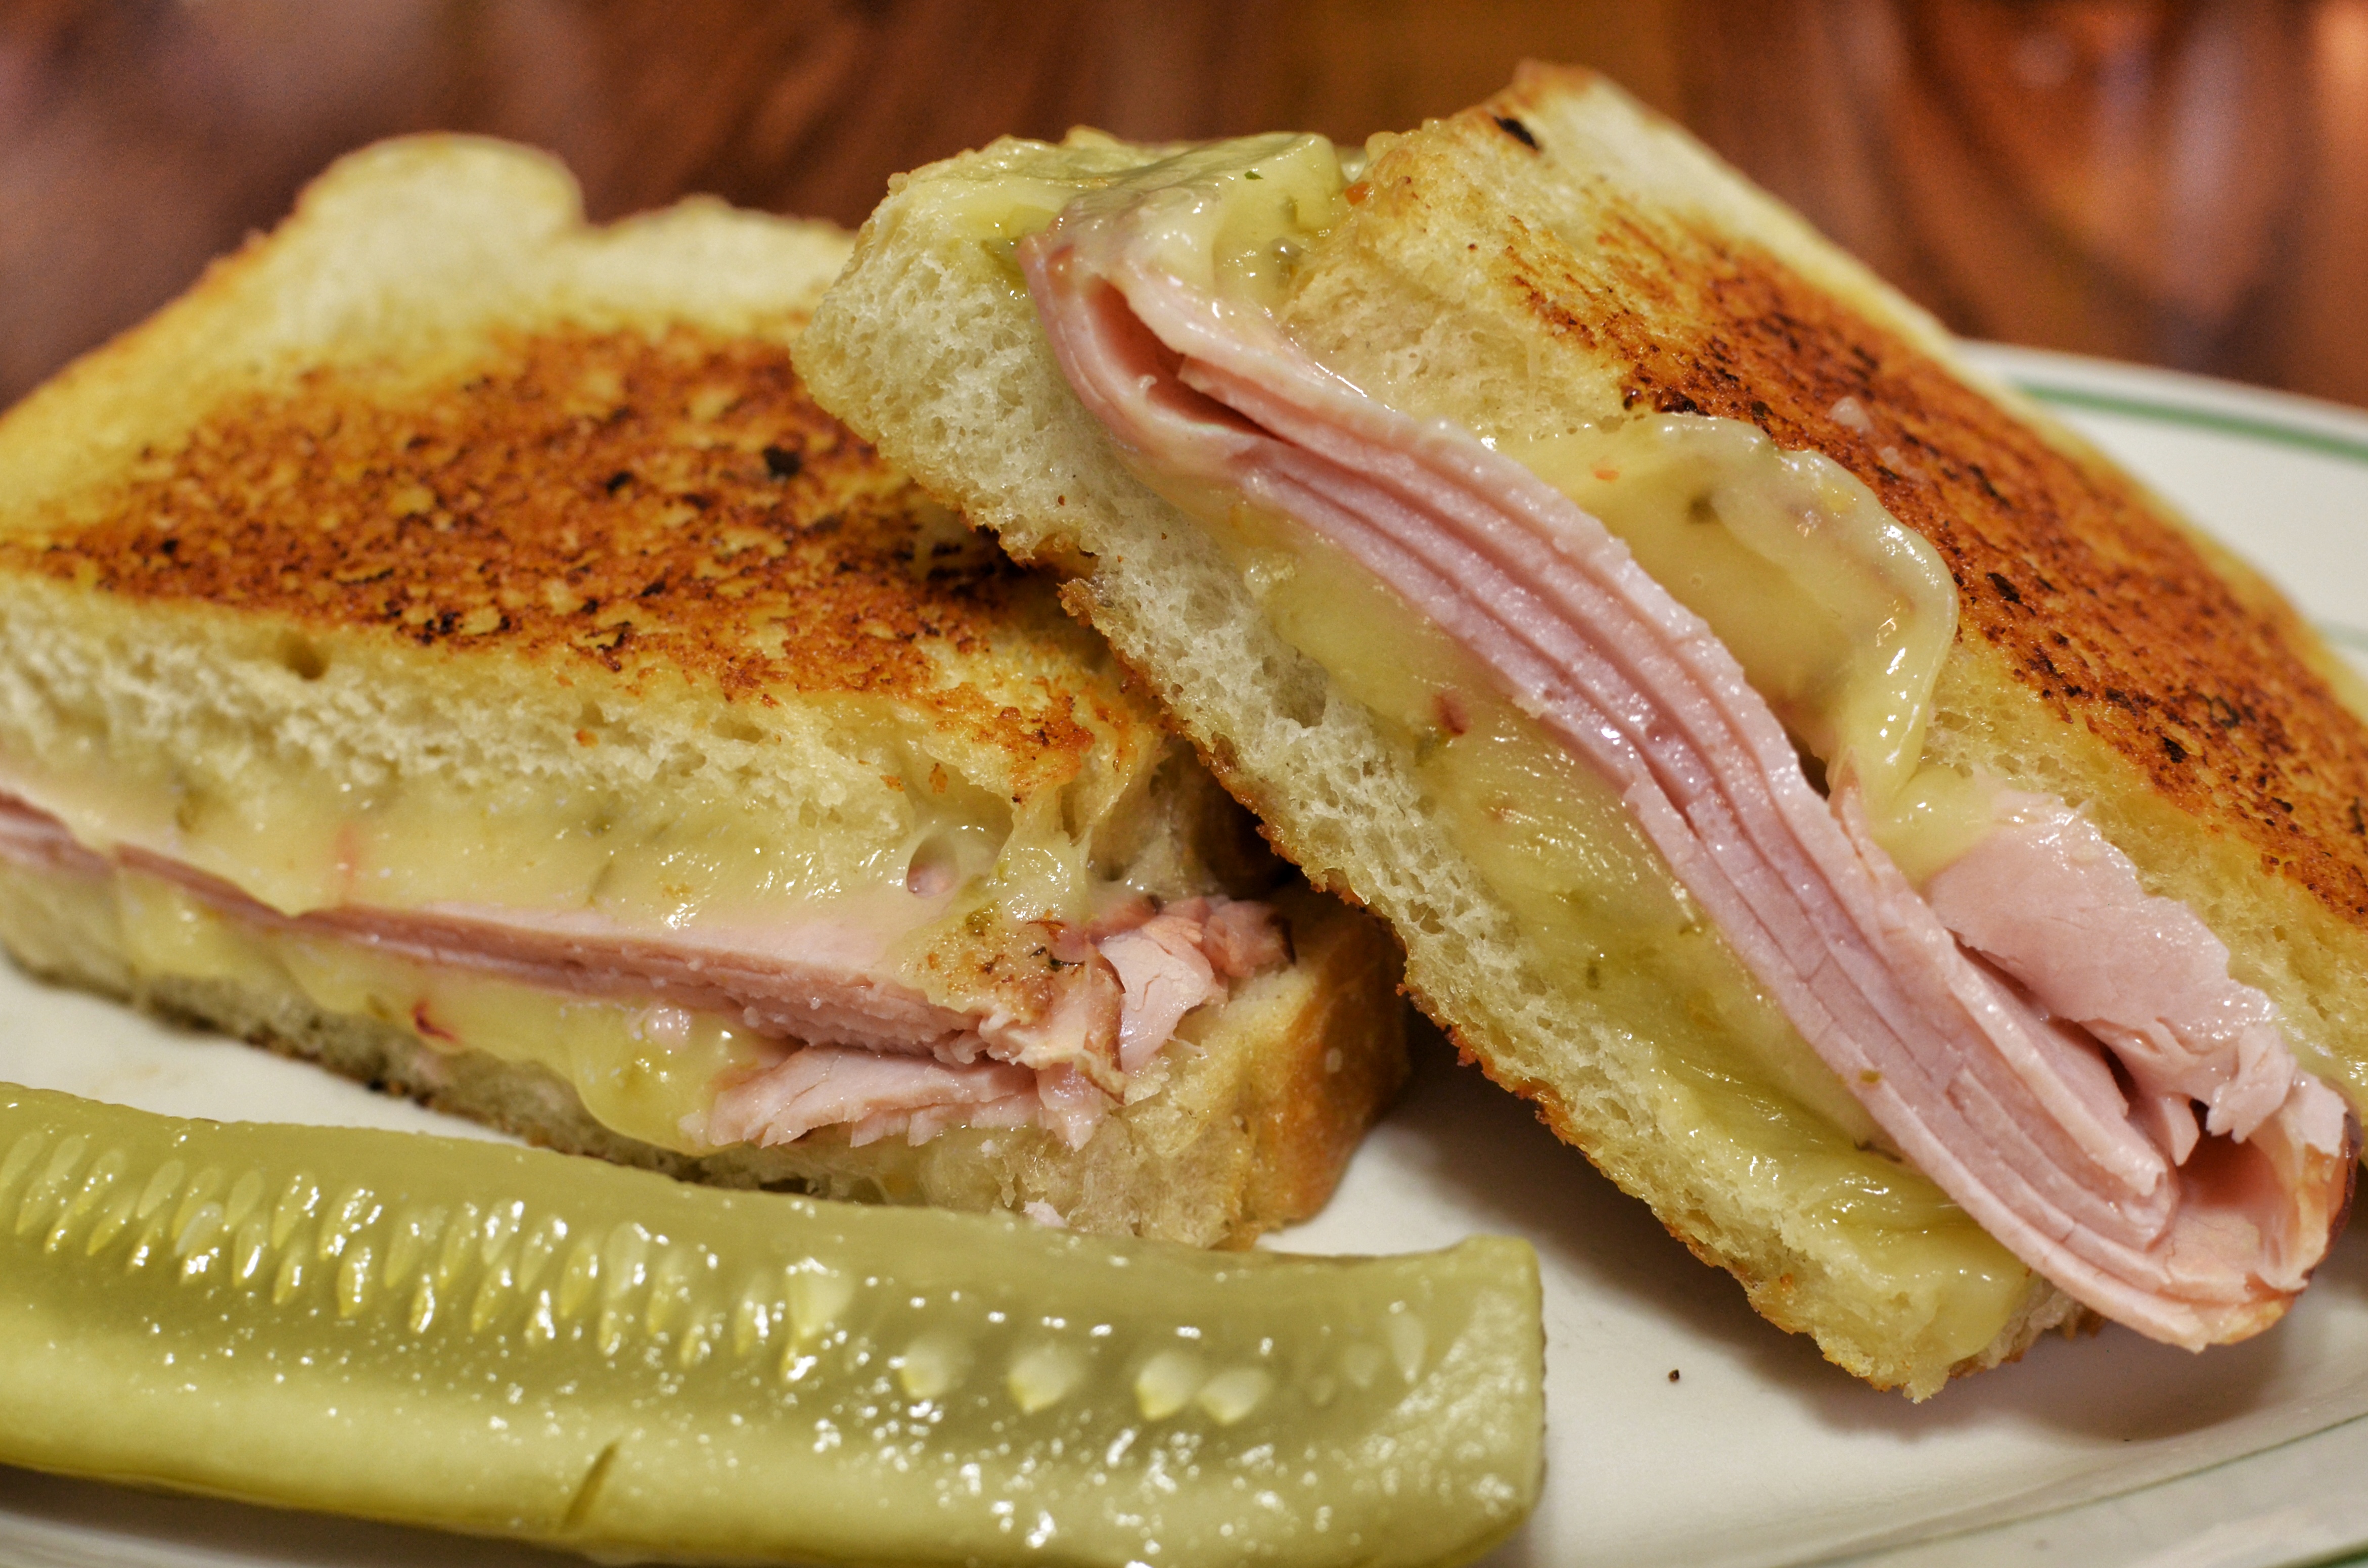 Mmm... back to basics - grilled ham and cheese